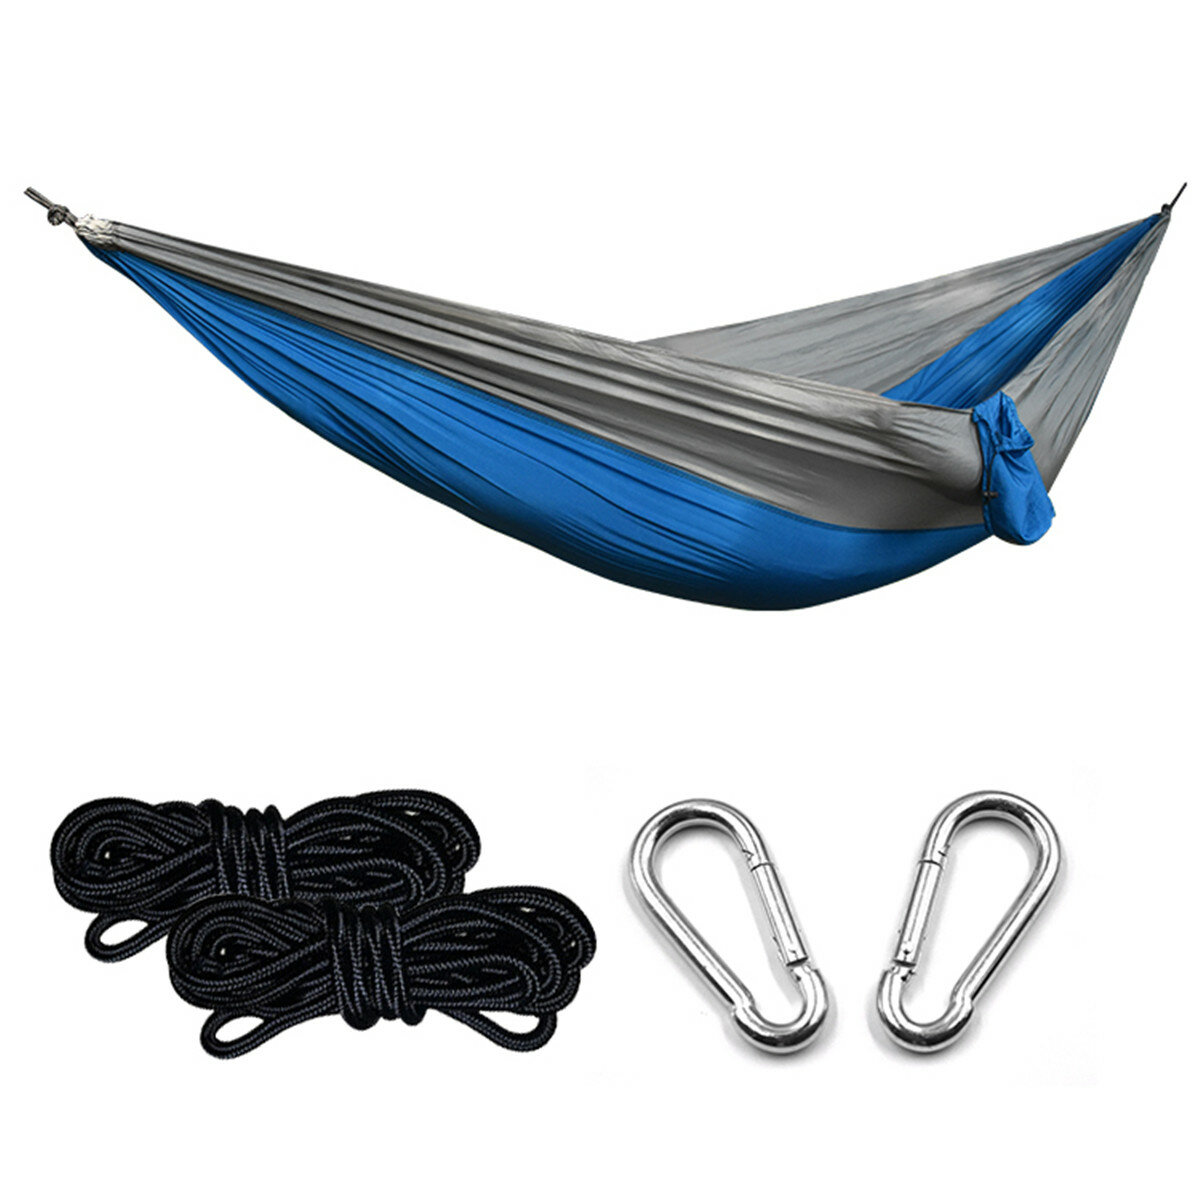 Indoor Outdoor Portable Camping Hiking Hammock Single with Straps Gear Backpacking Survival & Travel